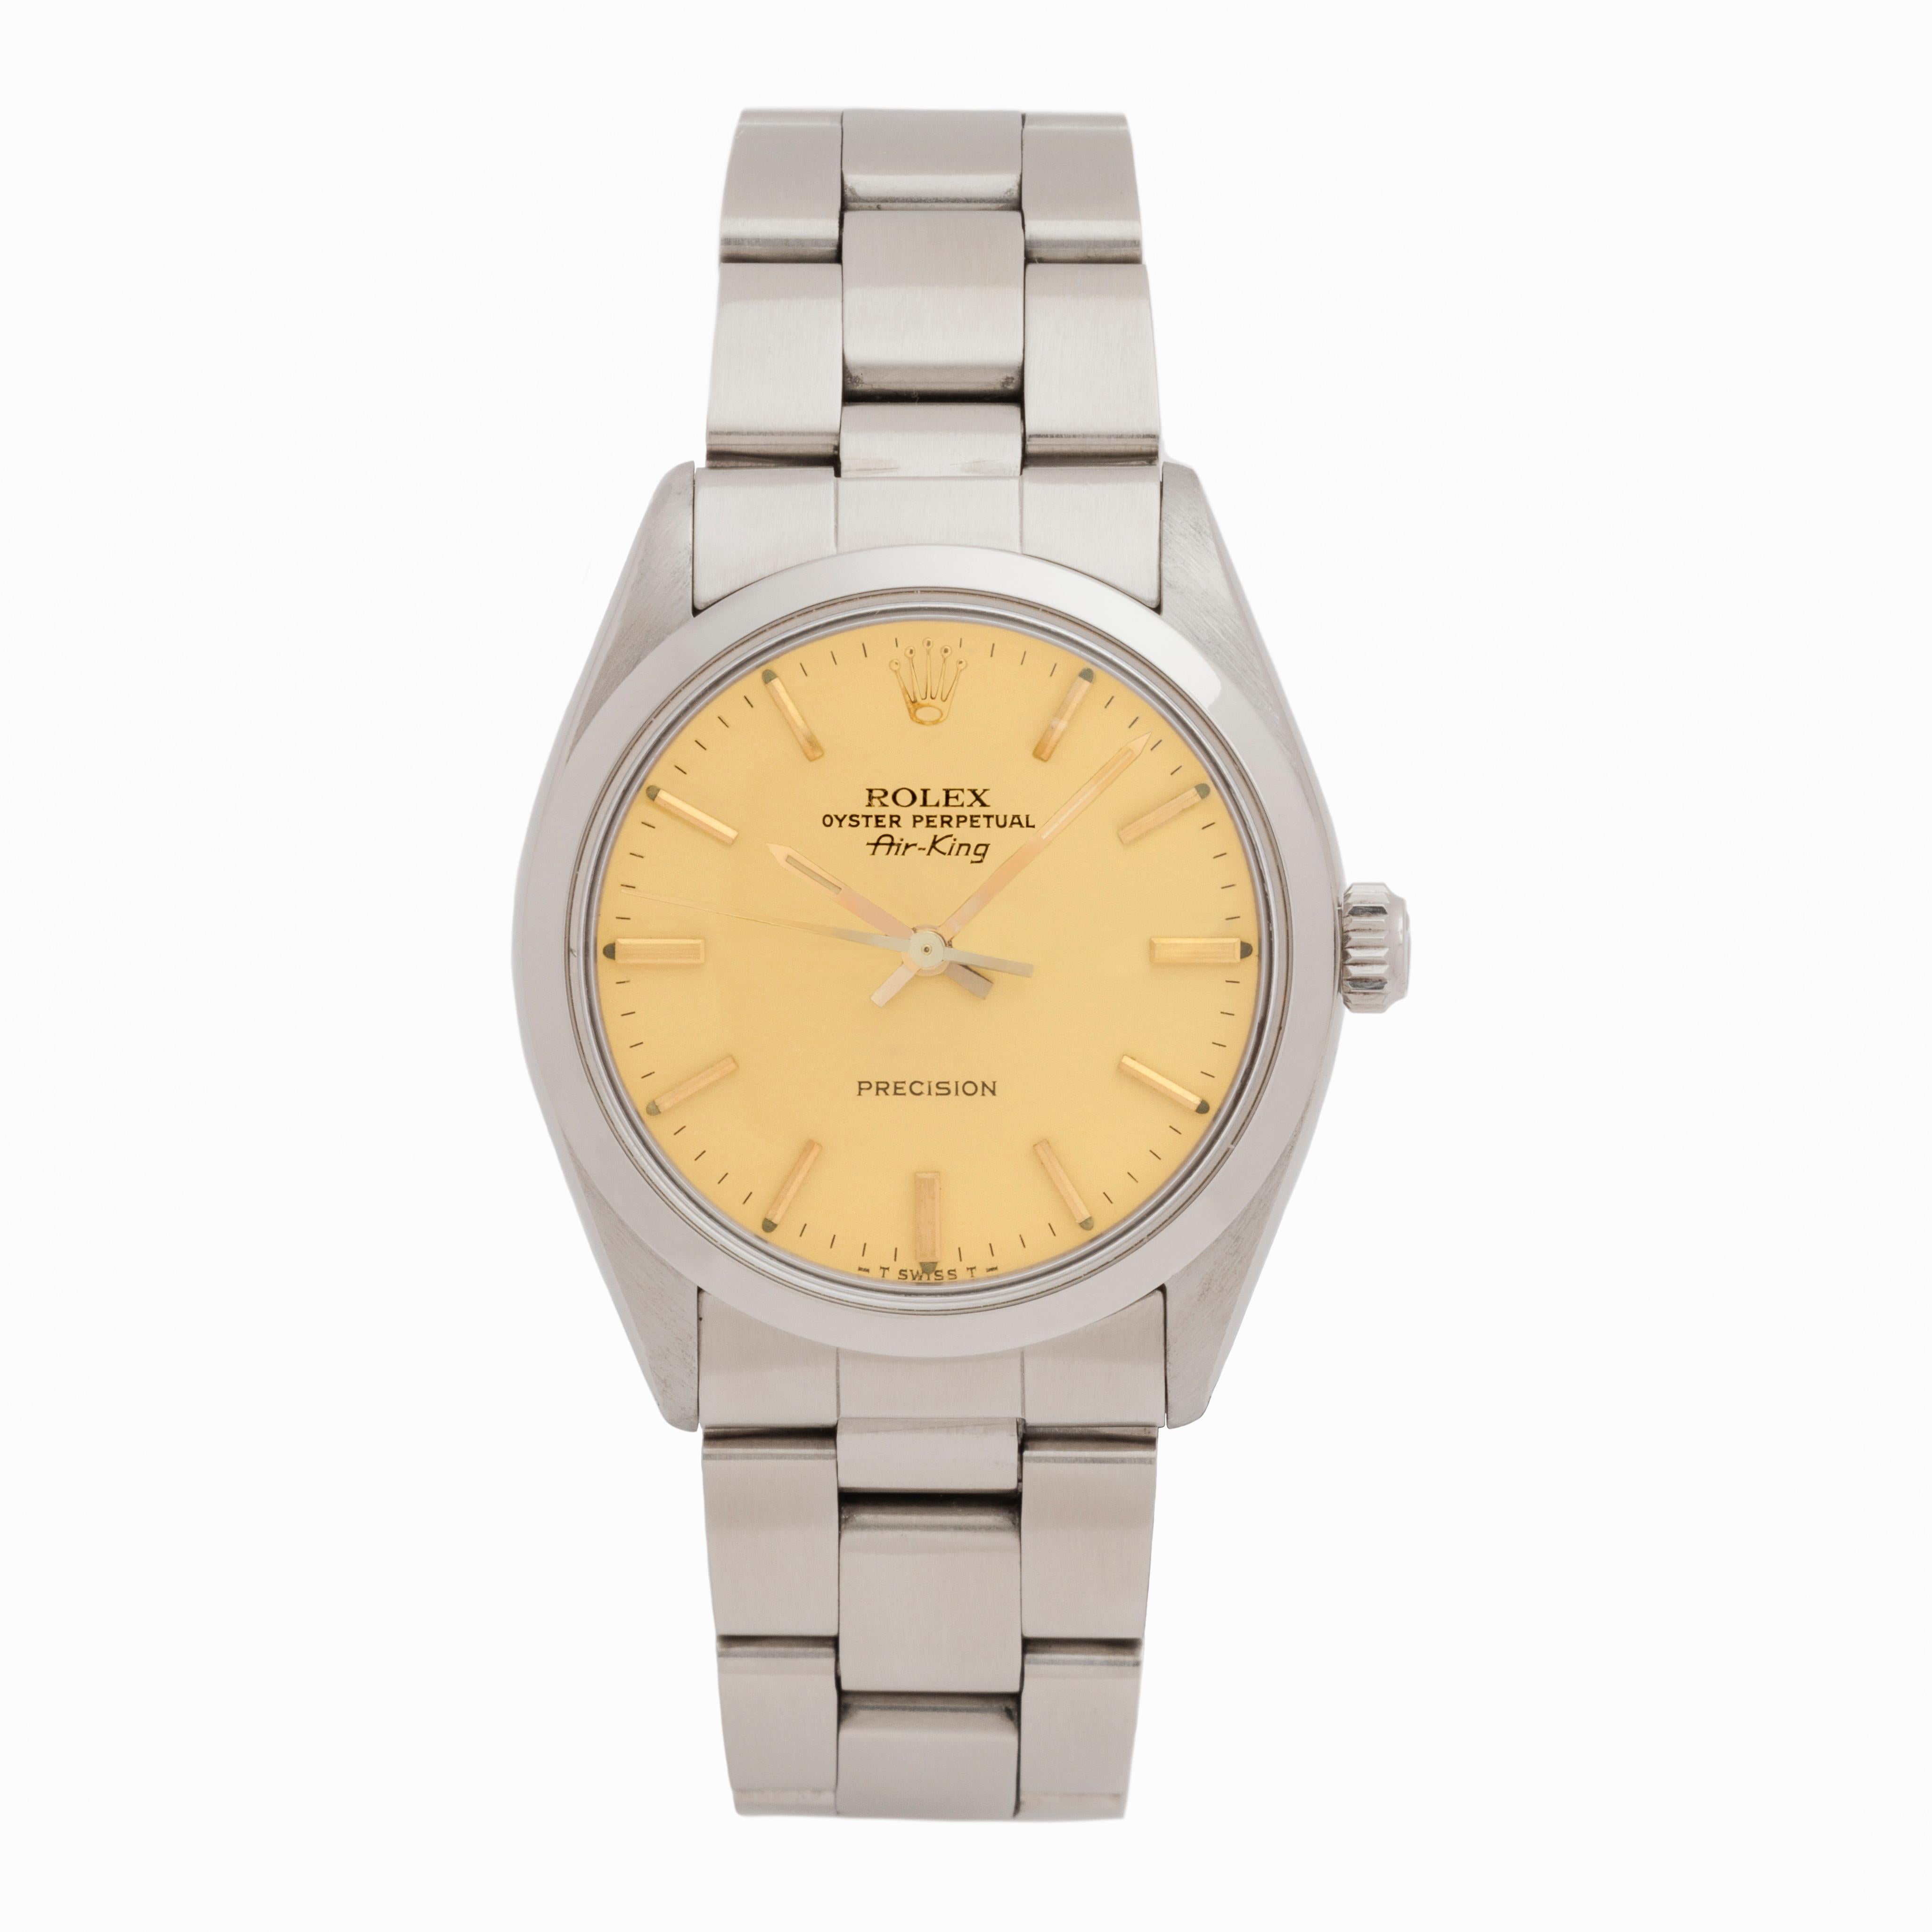 Vintage Rolex Air-King 
Model 5500 
Stainless Steel 
Yellow/Gold Original Dial  
c.1987

Stephanie Windsor guarantees the proper functioning of this watch mechanism for ONE year from the purchase date. Our watches are guaranteed to be of the period,